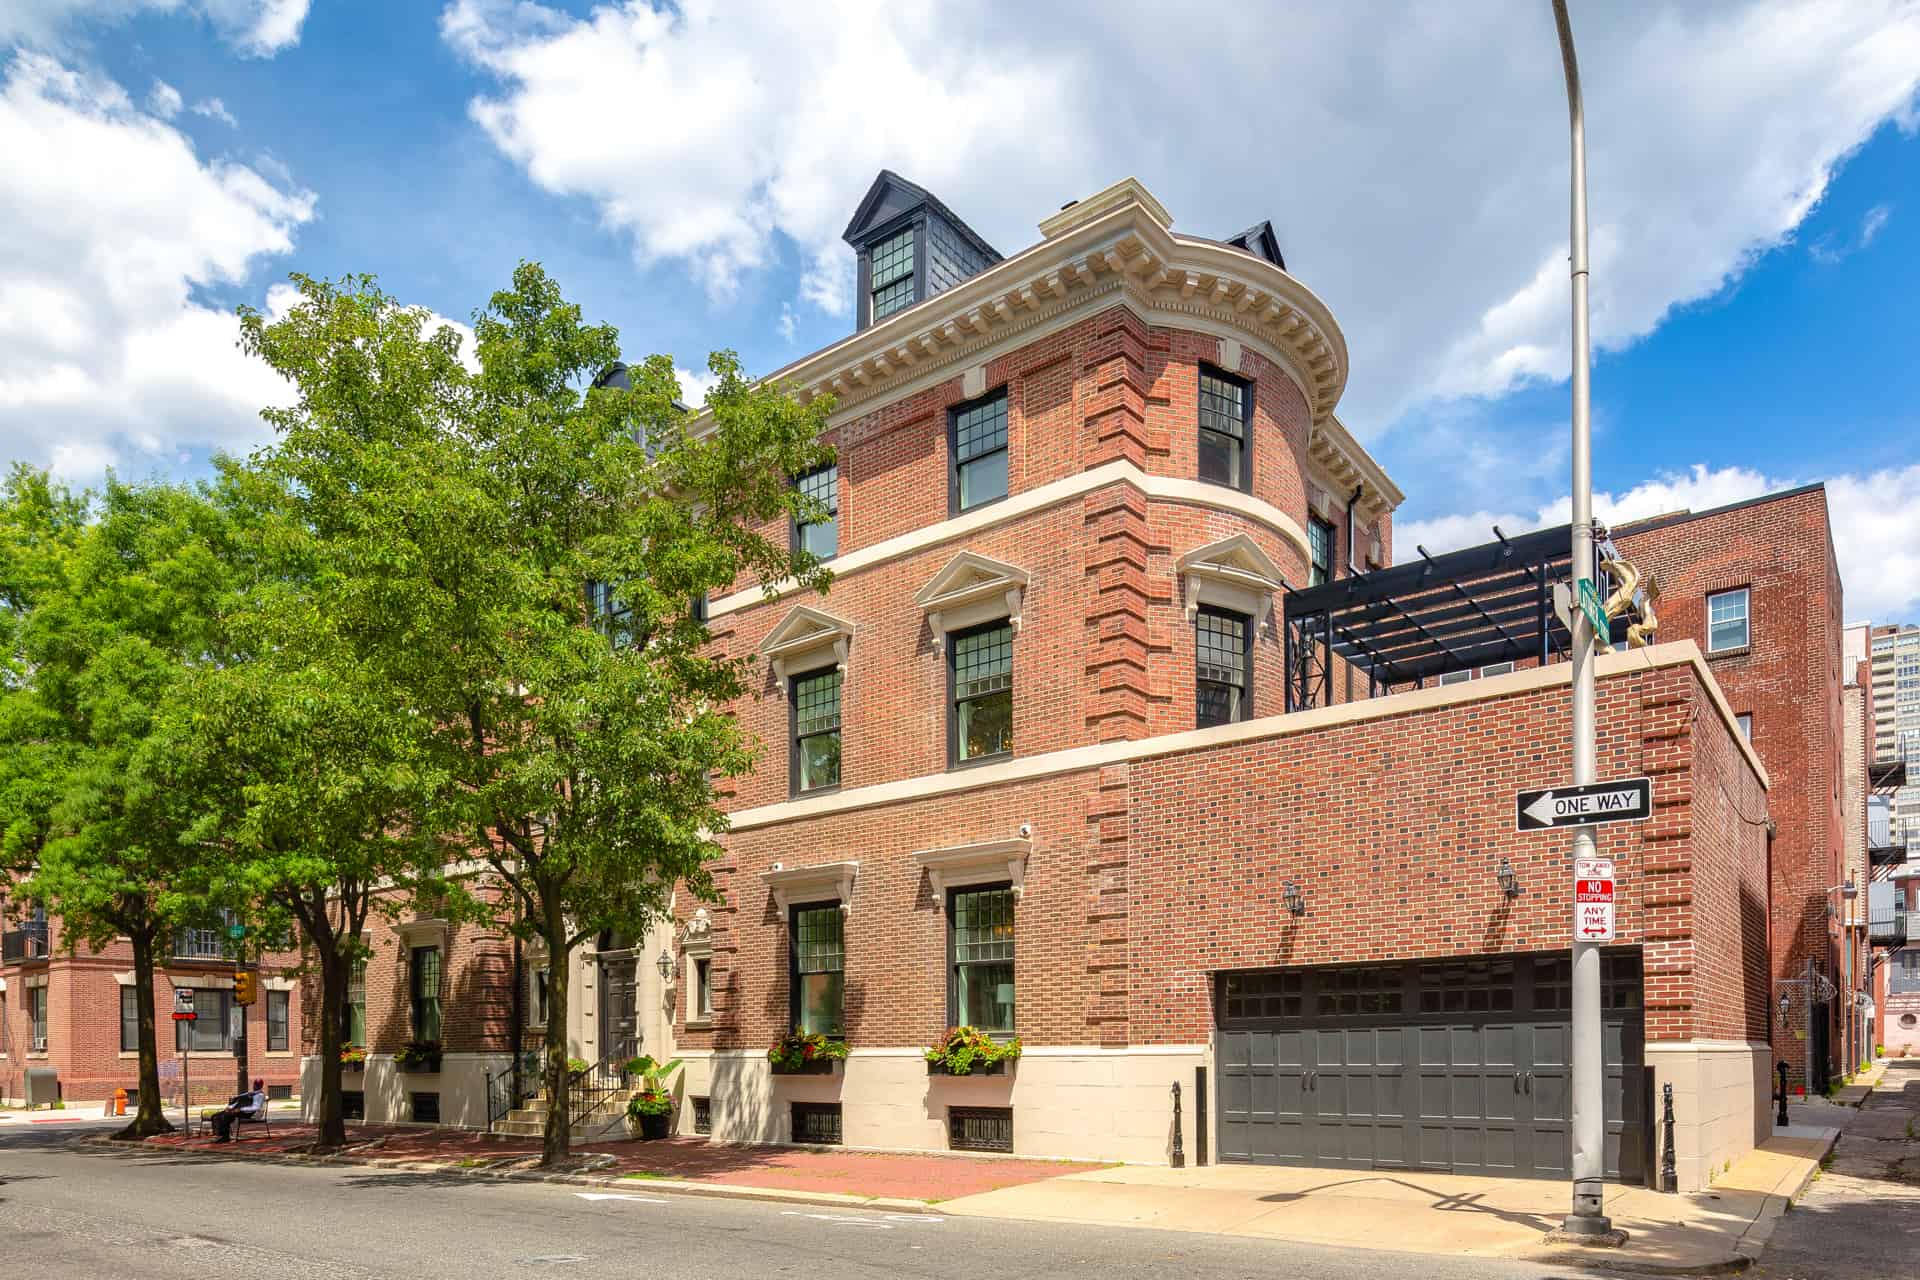 Real Estate Photograph of a Luxury Mansion on Spruce Street in Philadelphia, PA